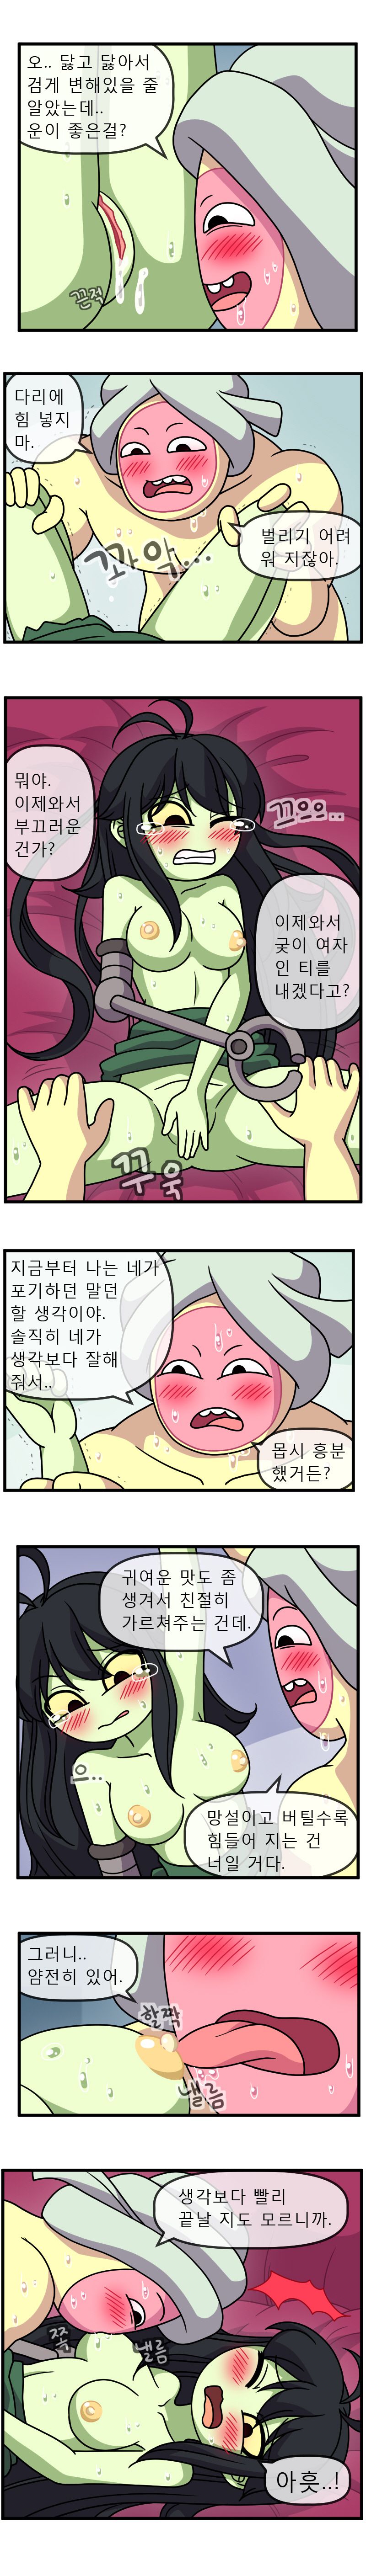 [WB] ADULT TIME 5 (Adventure Time) 11